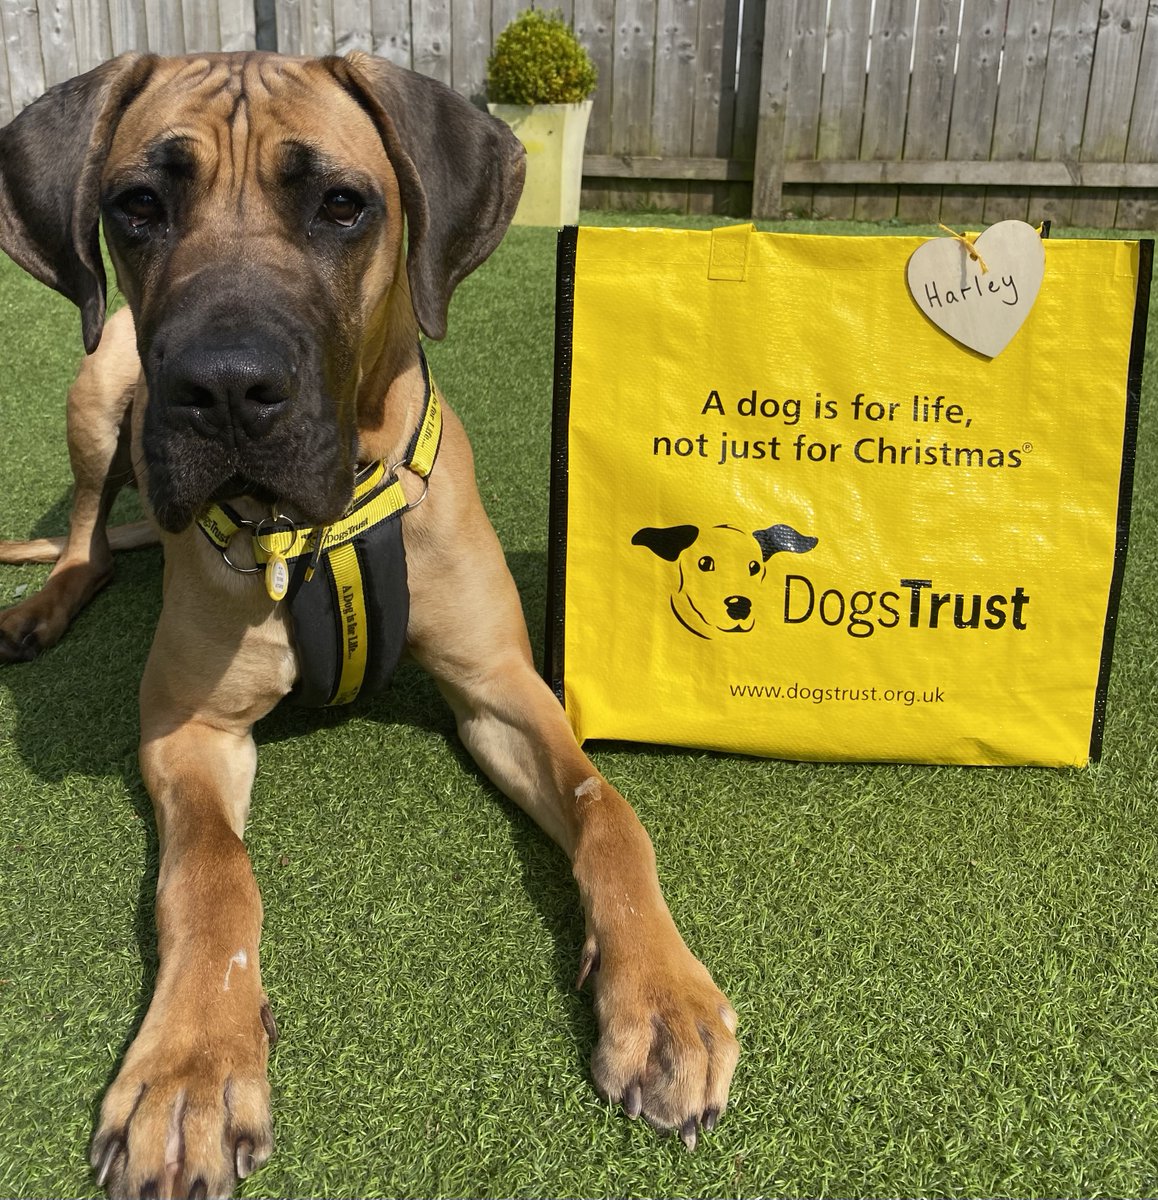 Handsome Harley 🐶 was first up this weekend to pack his big yellow bag 💛 and wave goodbye to all his friends at the centre 👋 as he headed off to his forever home 🏡 with his new paw-rents! 🐾 @DogsTrust #BigYellowBagDay #AdoptDontShop #ADogIsForLife